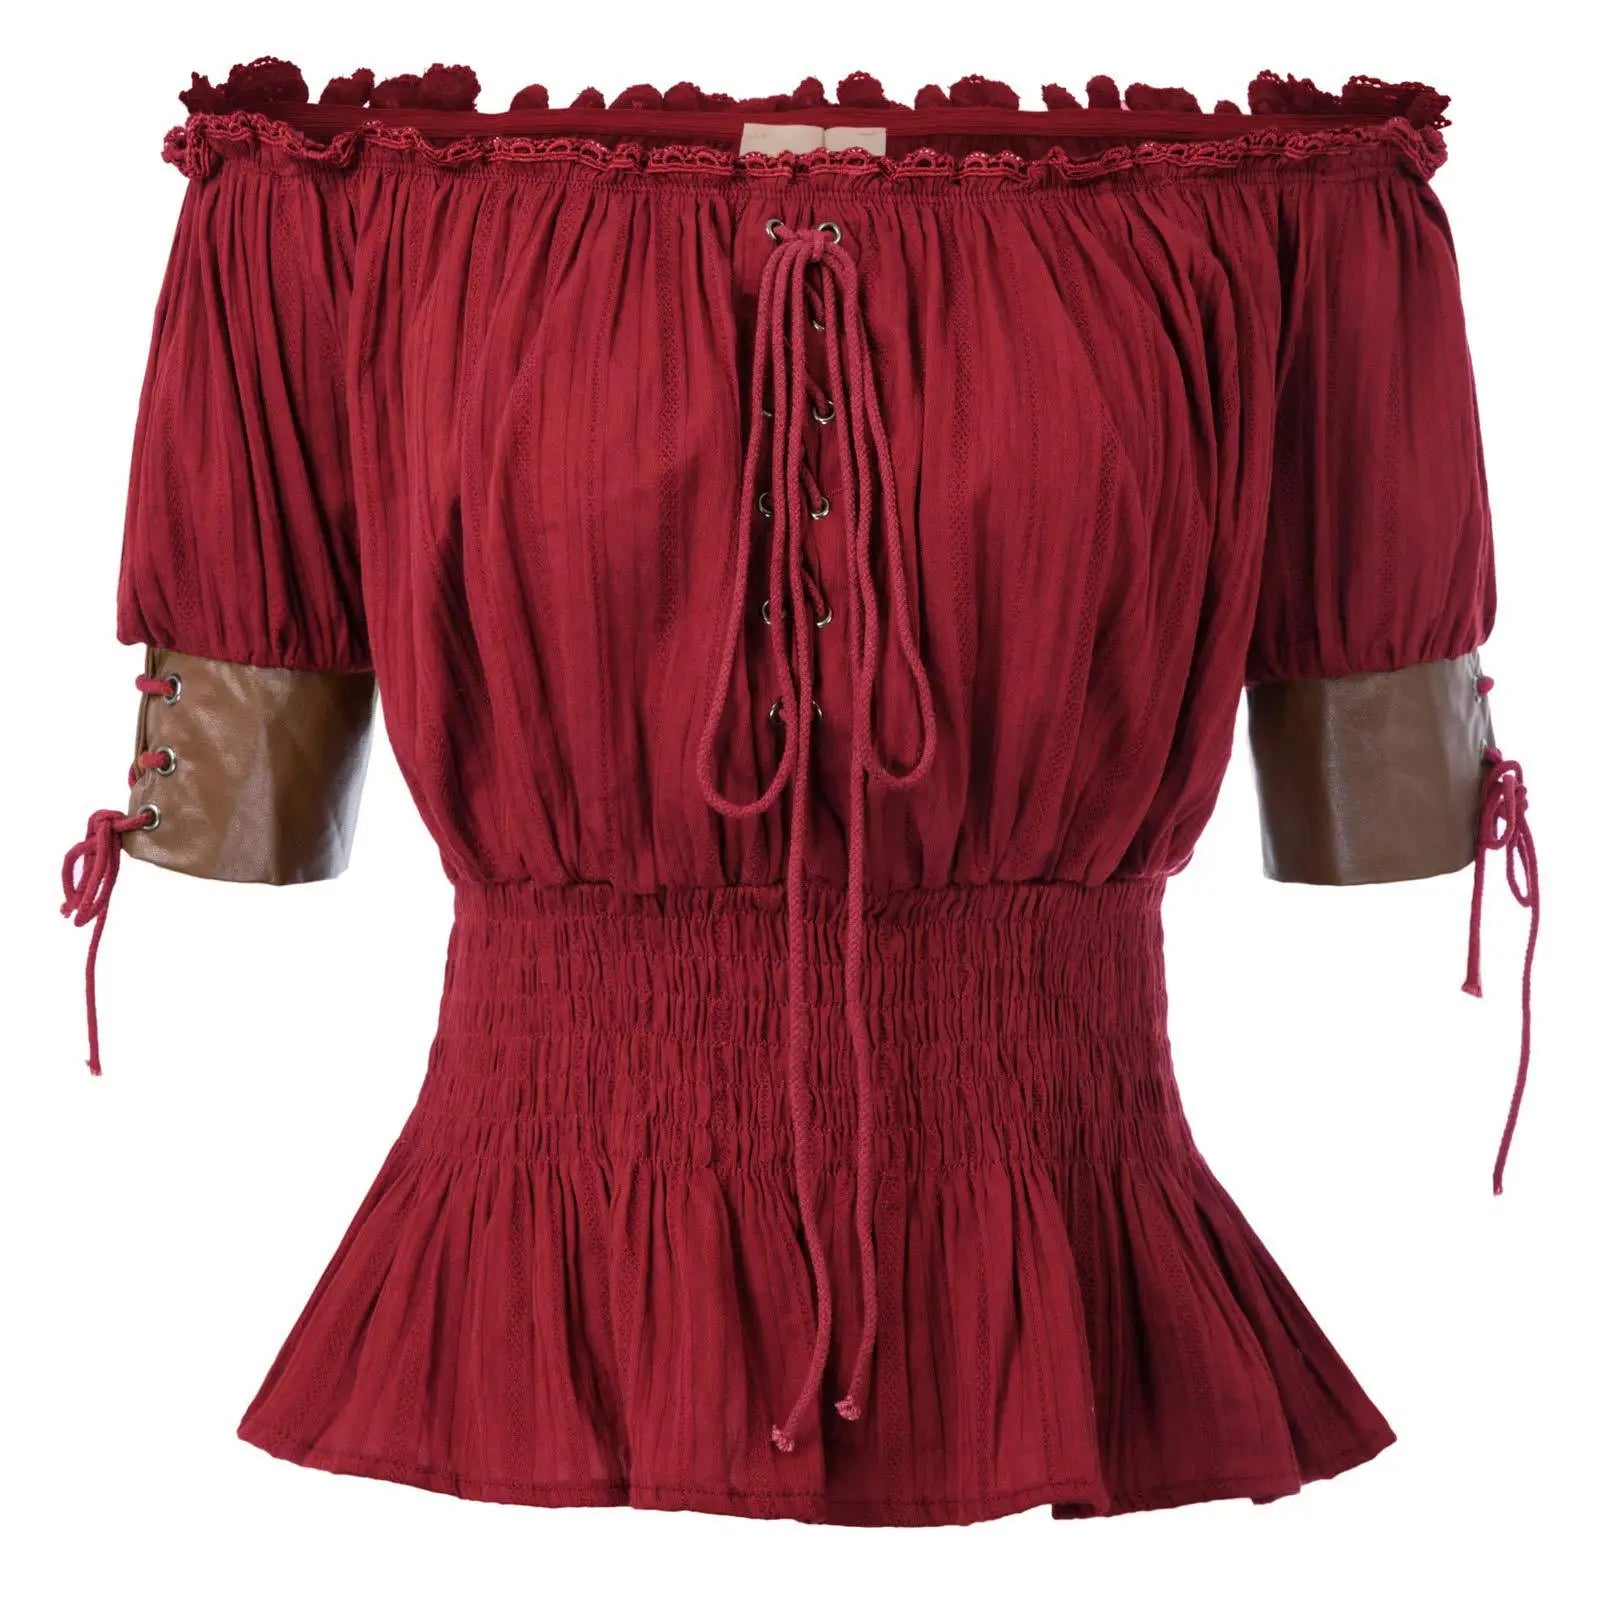 Red Medieval Women's Vintage Blouse Retro Steampunk Top Victorian Half Sleeve Off Shoulder Shirts Sweet Loose Clothes Female with cinched waist, lace-up front, and brown leather sleeve panels by Maramalive™. Perfect for medieval costumes or as a unique addition to women's tops collections.